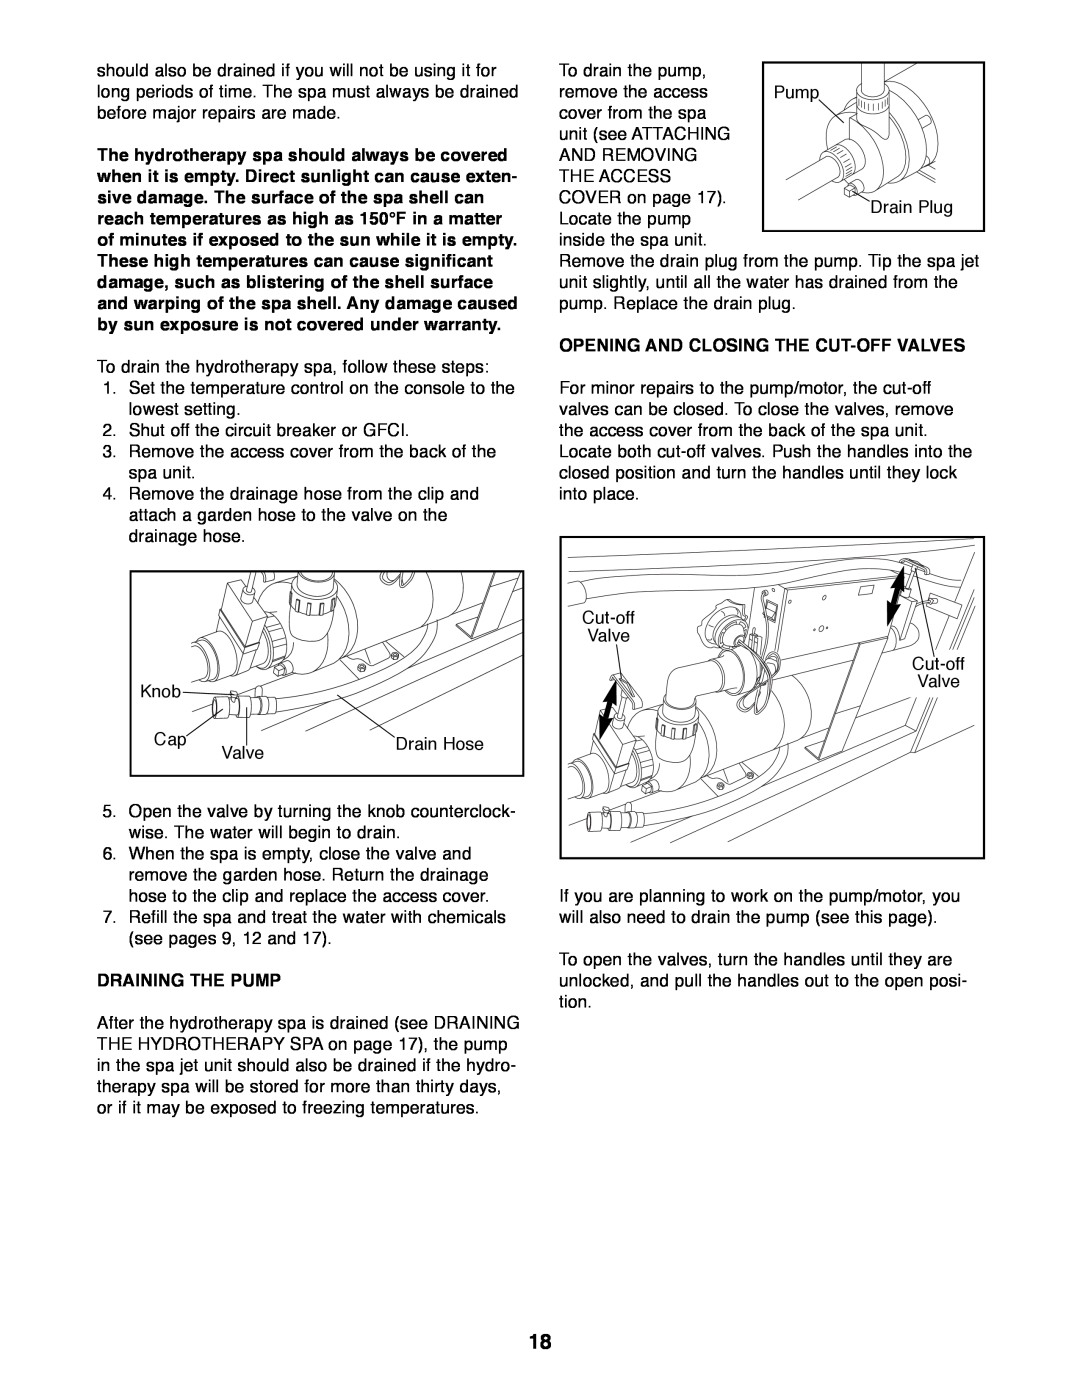 ProForm 831.21005 user manual Draining The Pump, Opening And Closing The Cut-Offvalves 